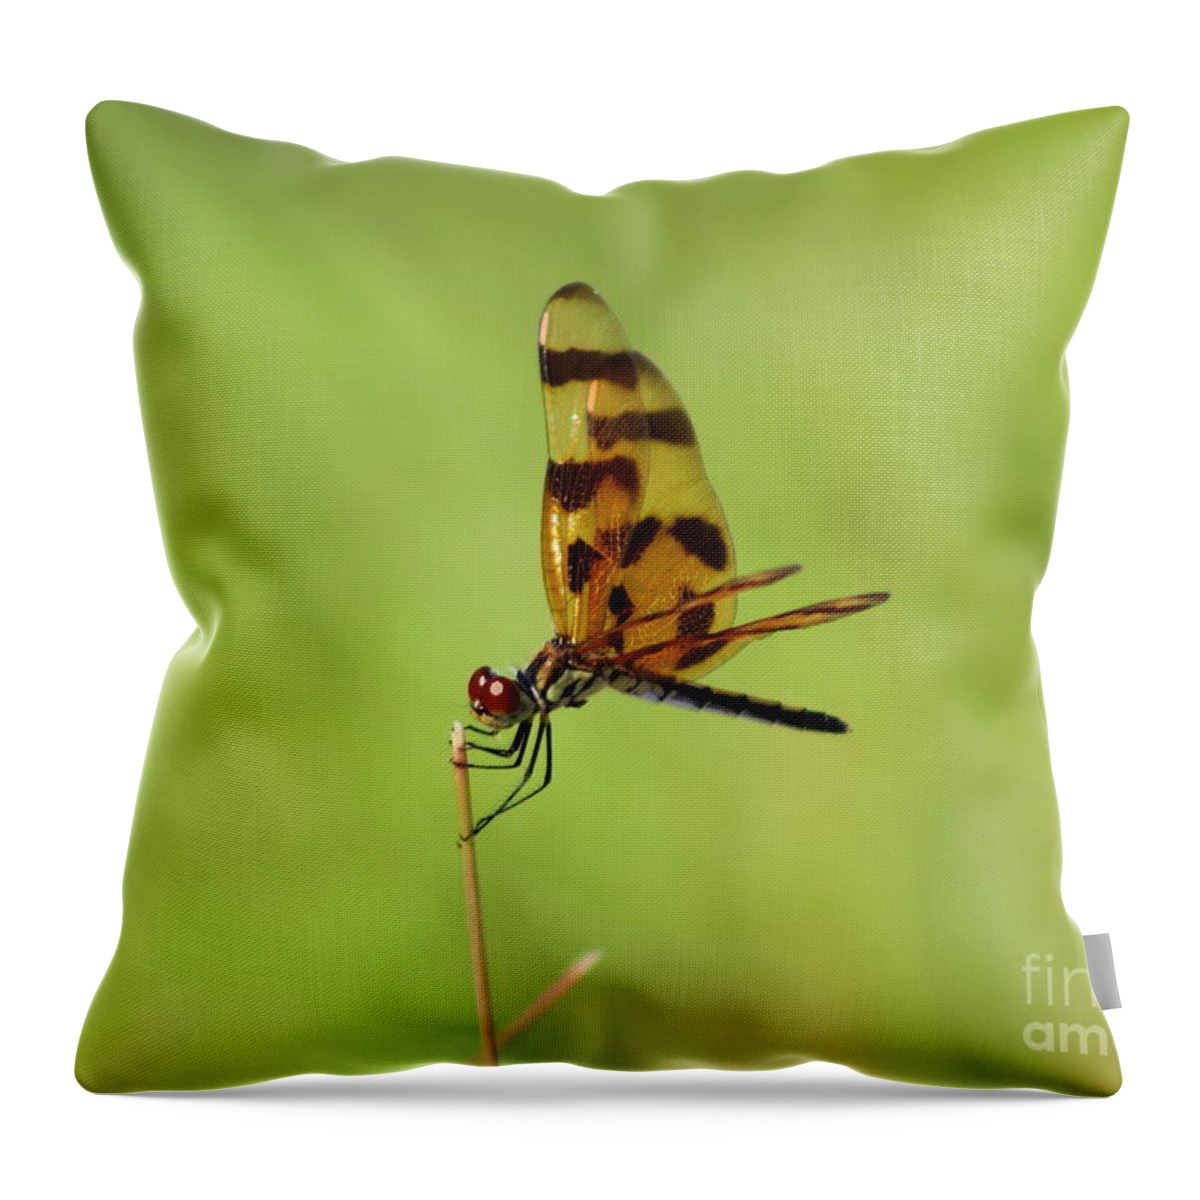 Dragonfly Throw Pillow featuring the photograph Dragon Pose by Andre Turner